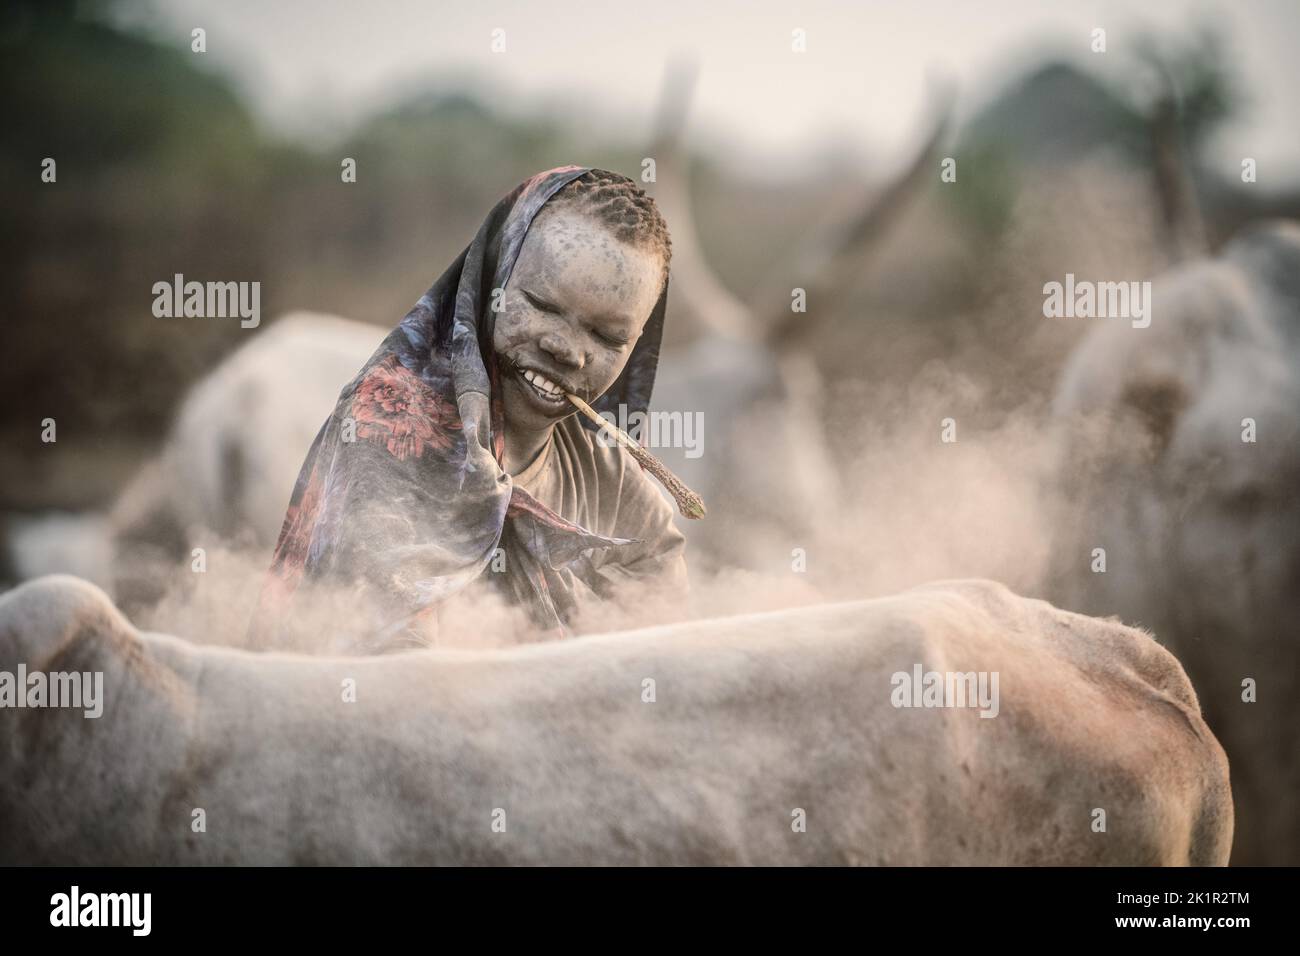 A child with a cow in the morning. South Sudan: THESE STUNNING images show the incredible bond between the Mundari people and their cattle in South Su Stock Photo